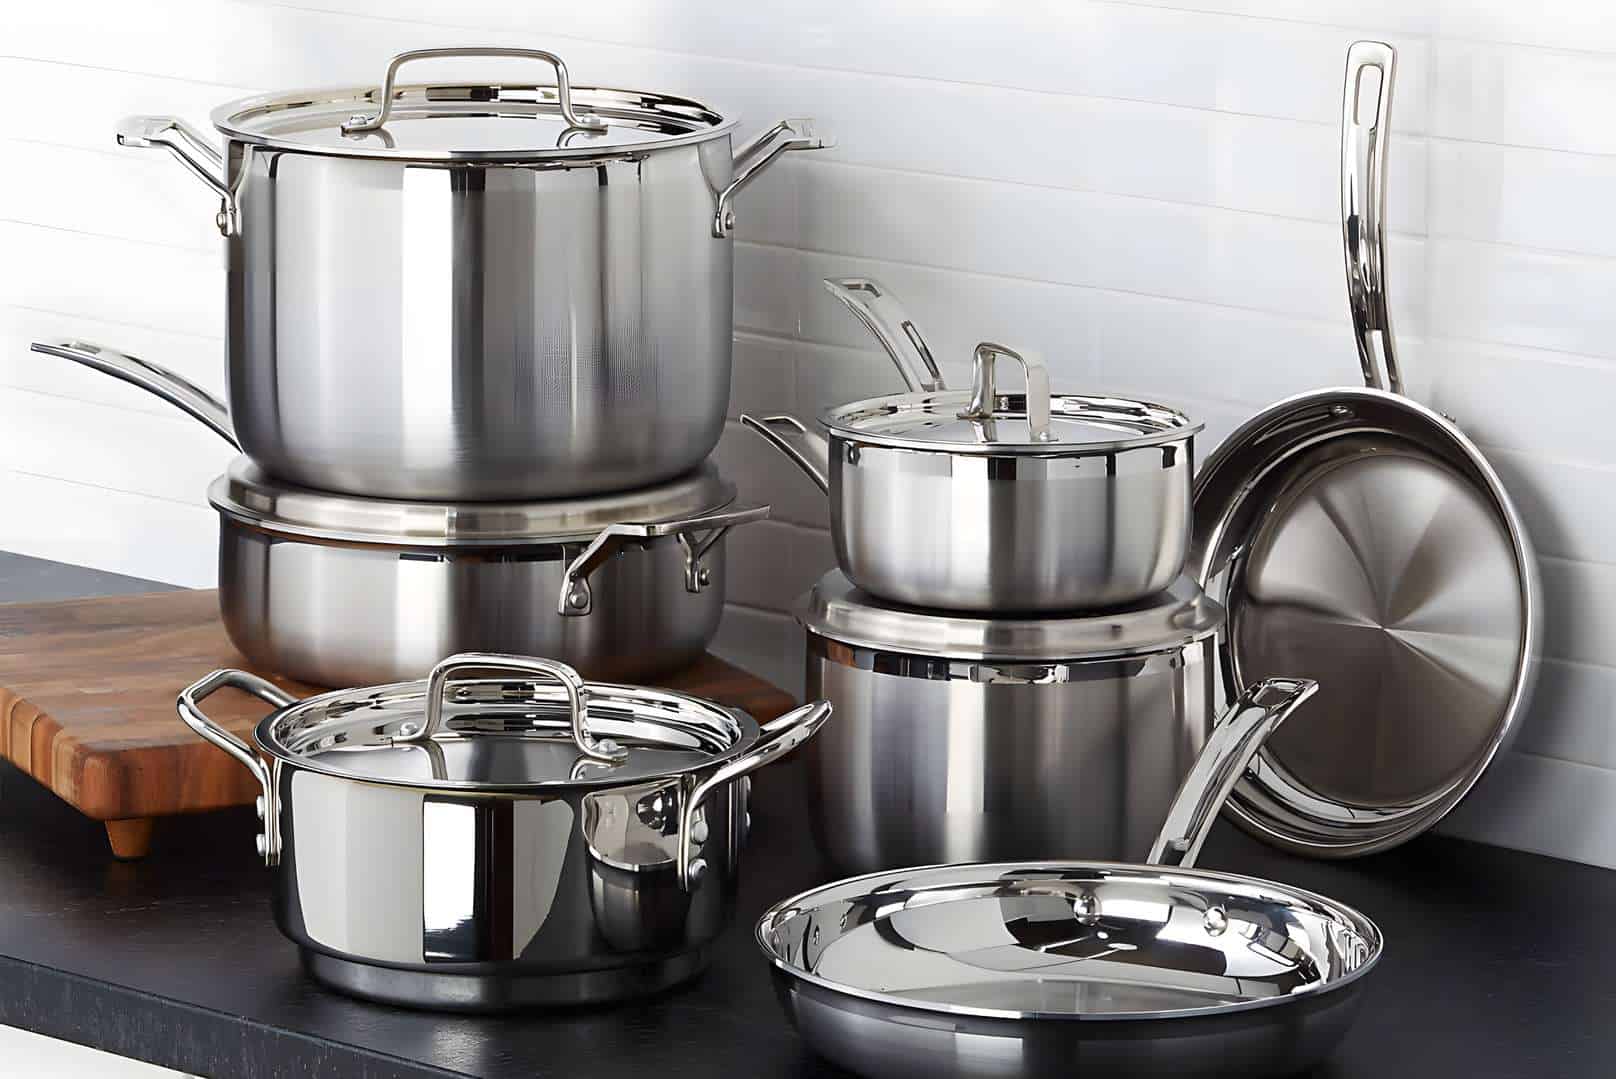 A brief overview about Cuisinart